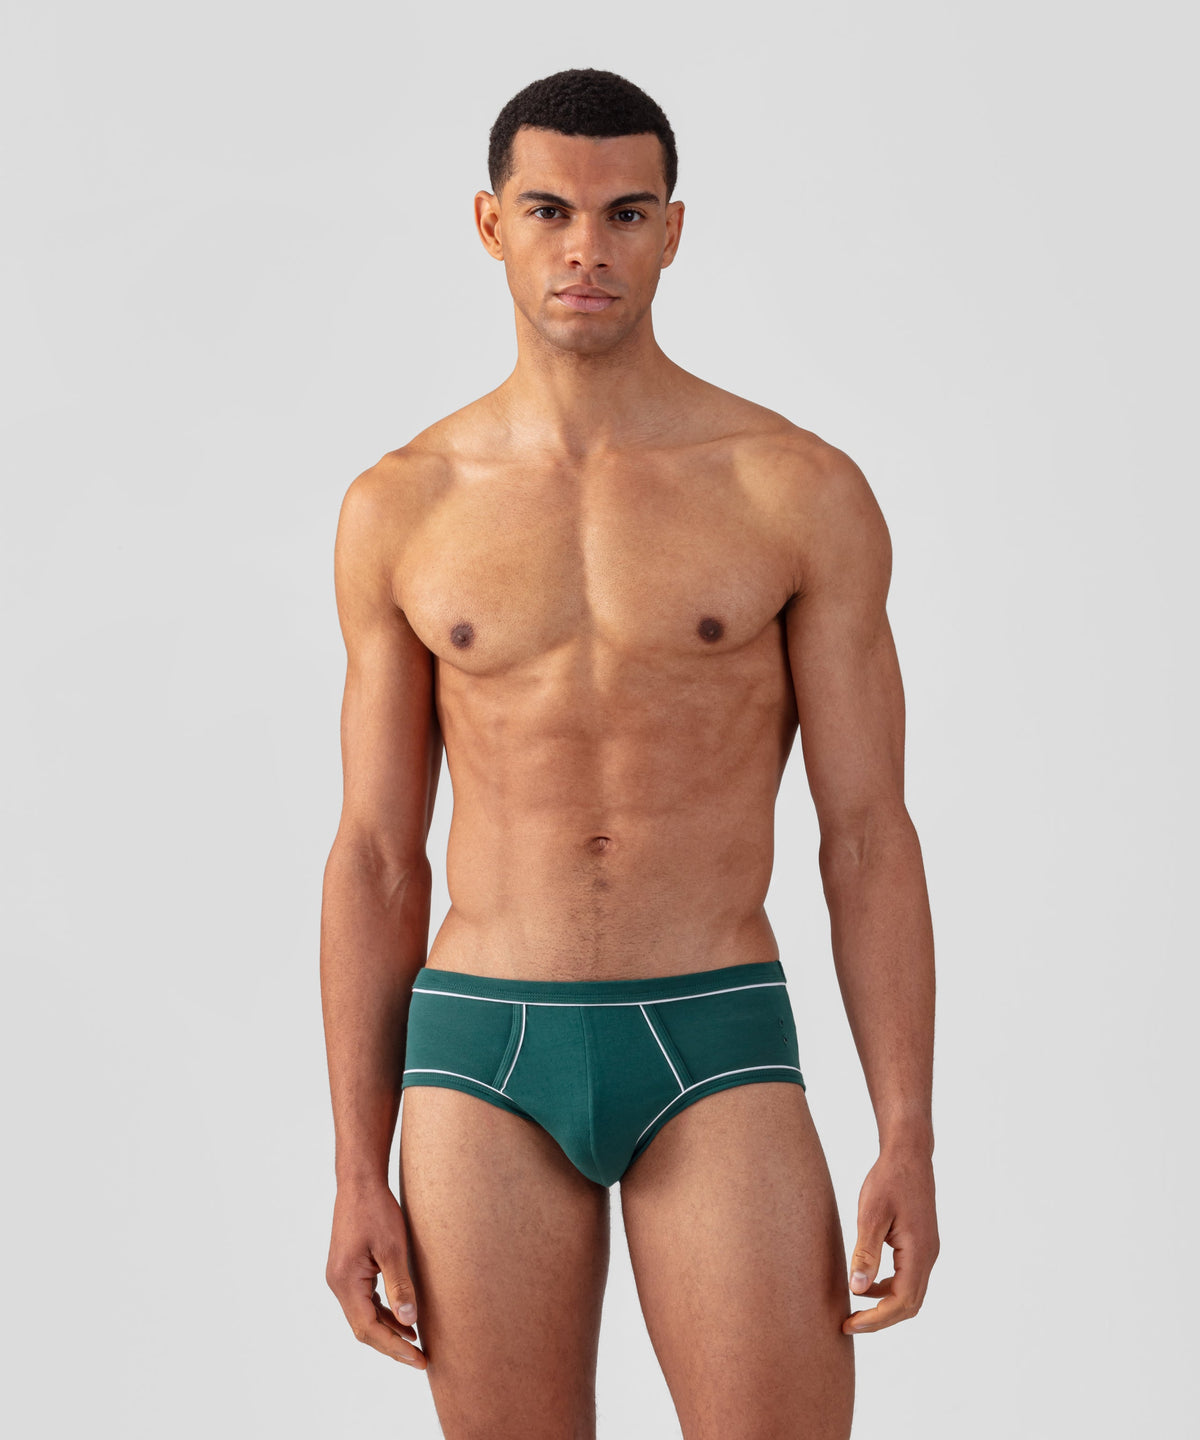 The Nouvelle Collection of luxury, designer underwear